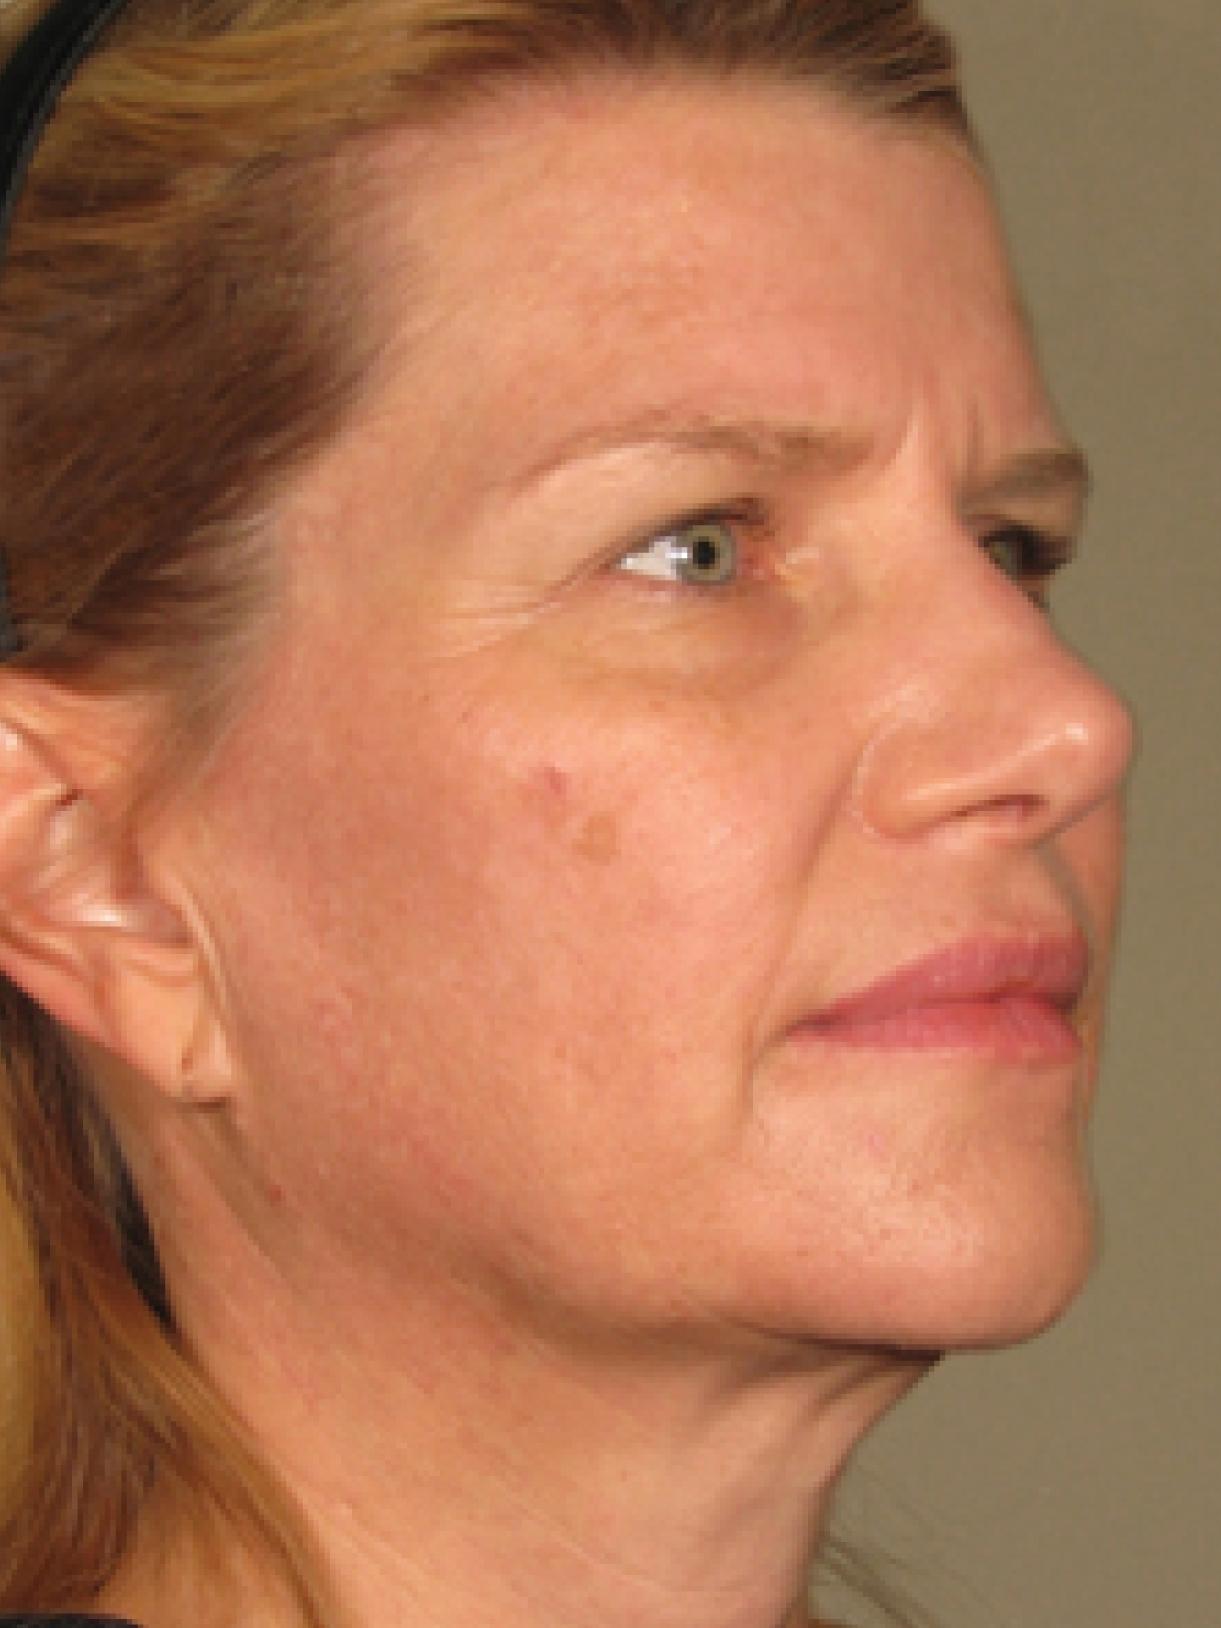 Ultherapy® - Face: Patient 3 - After 1